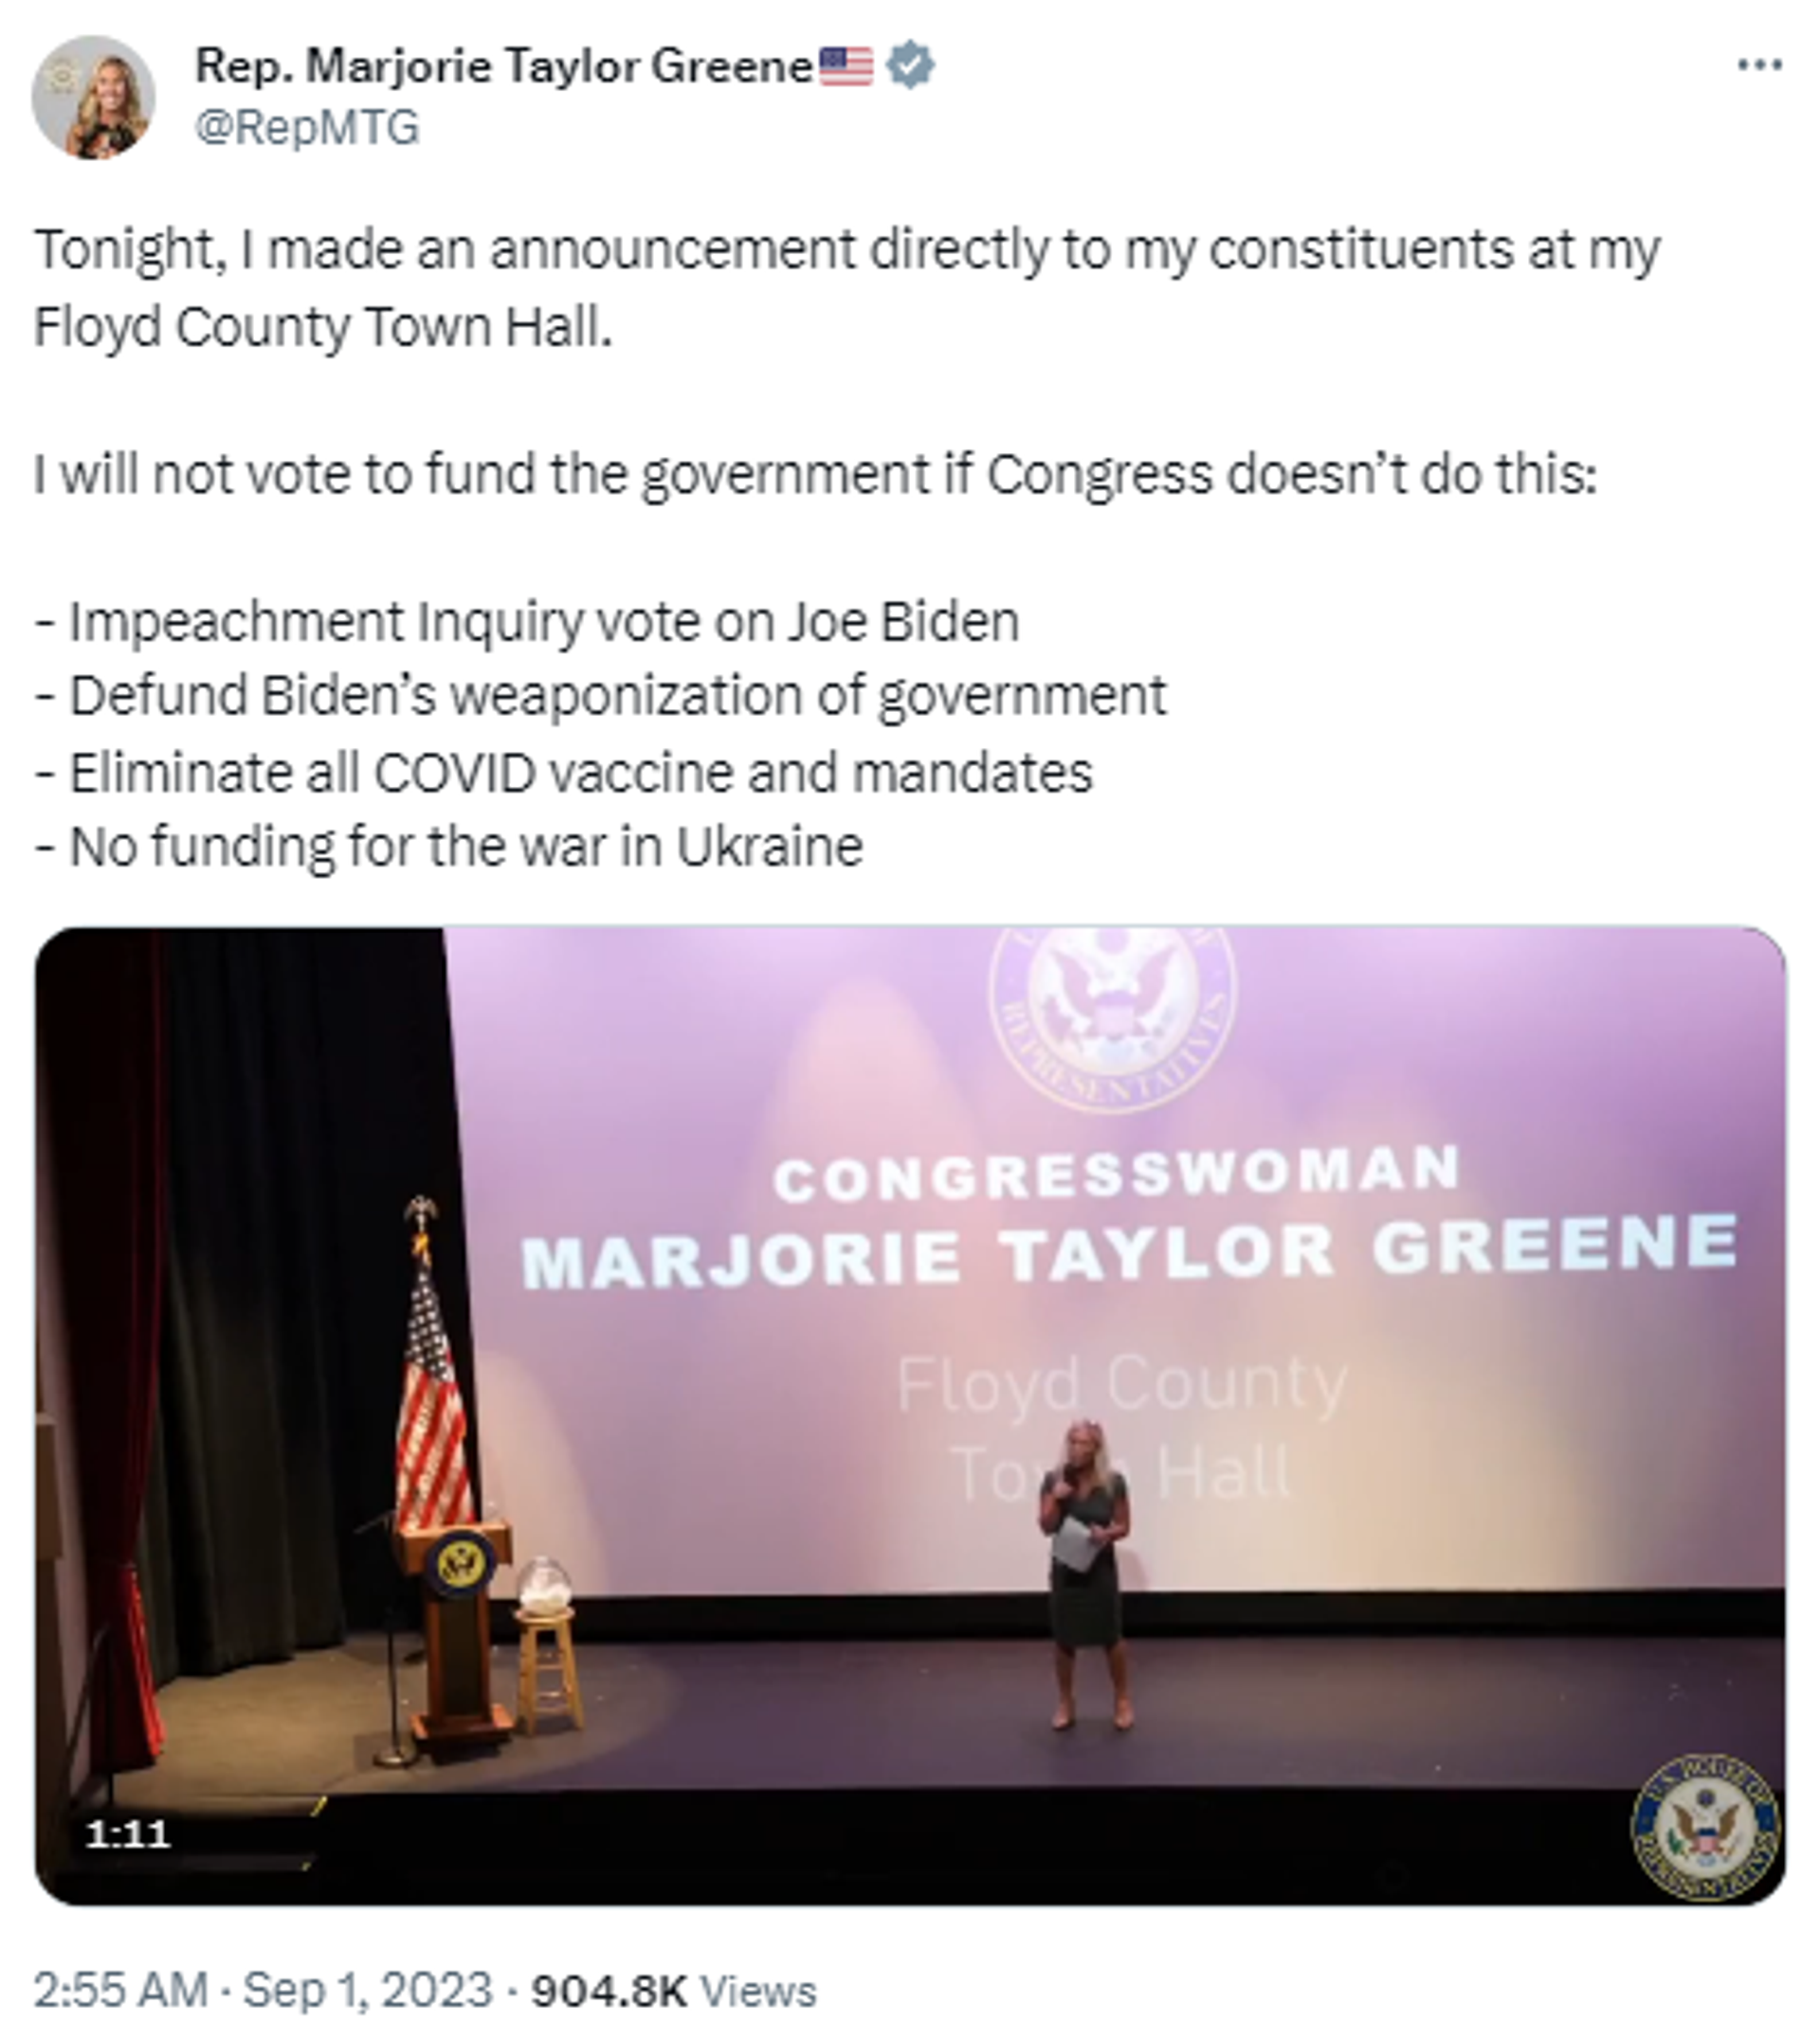 Screenshot of X post made by Congresswoman Marjorie Taylor Greene (R-Ga.) featuring her appearance at the Floyd county town hall. - Sputnik International, 1920, 01.09.2023